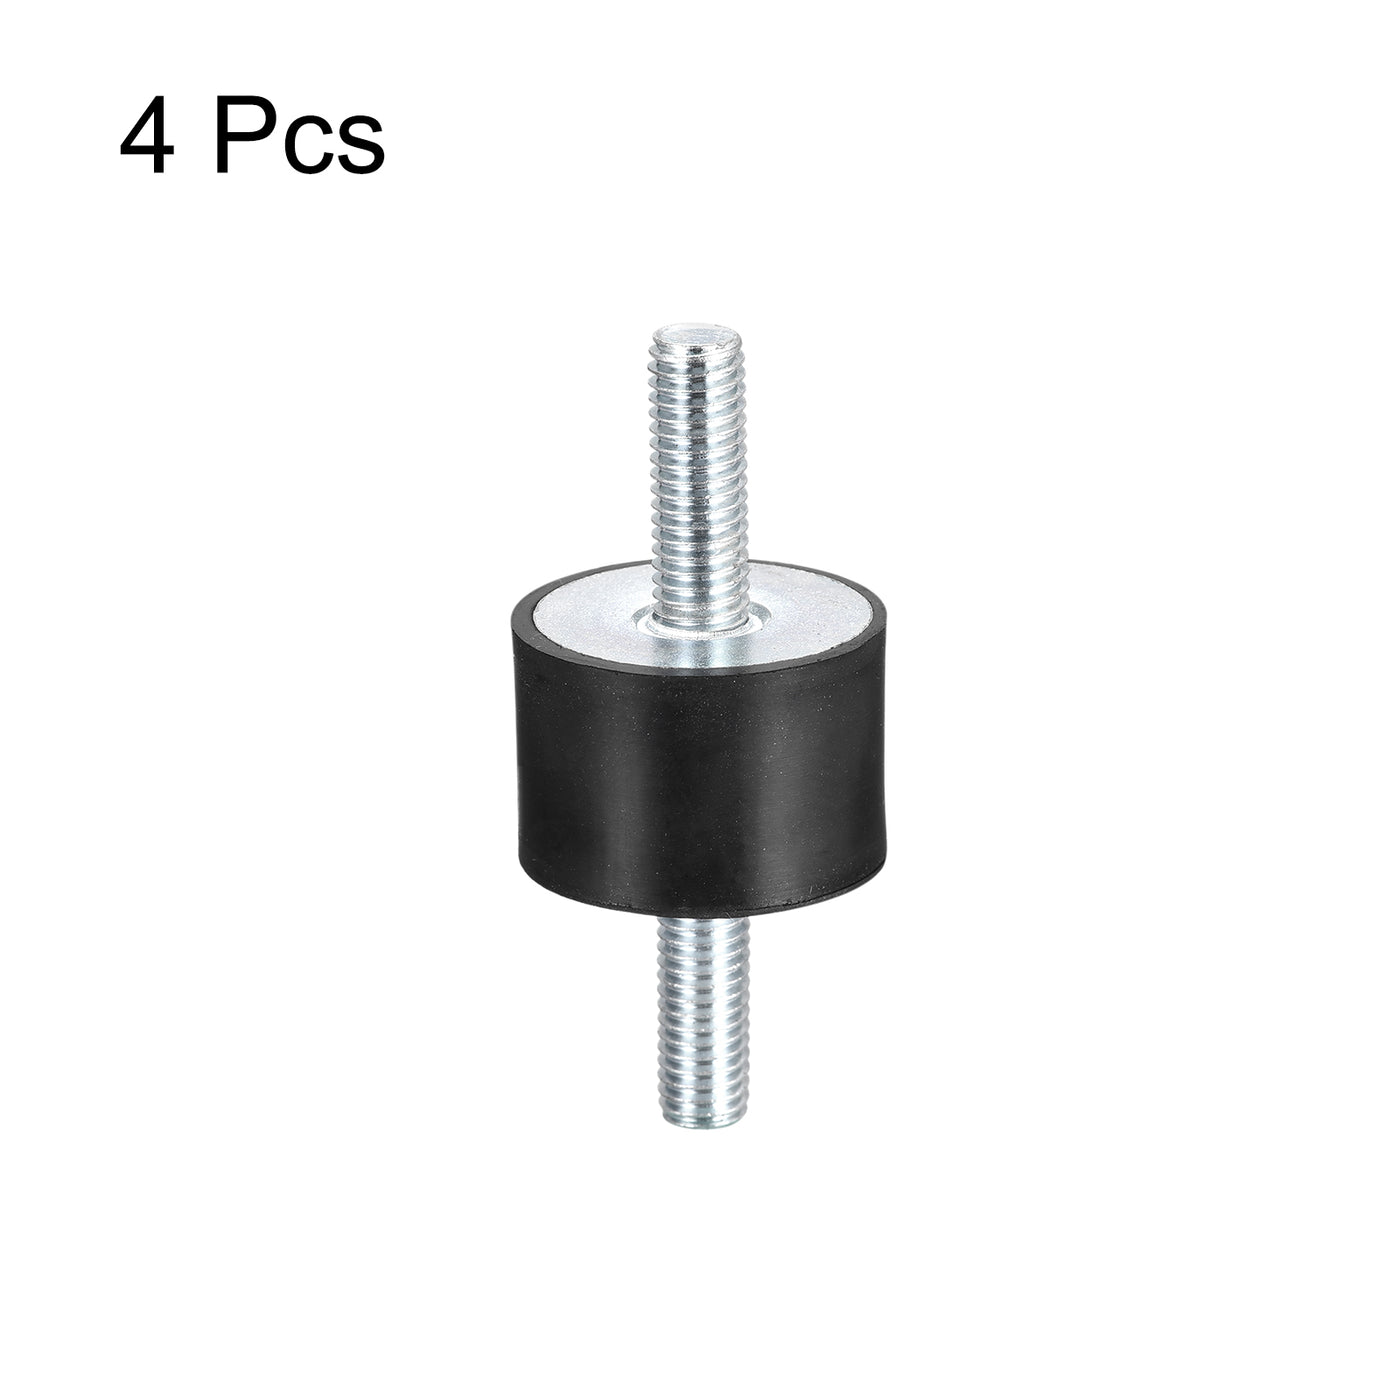 uxcell Uxcell Rubber Mounts 4pcs M8x23mm Male Vibration Isolator Shock Absorber D30mmxH20mm